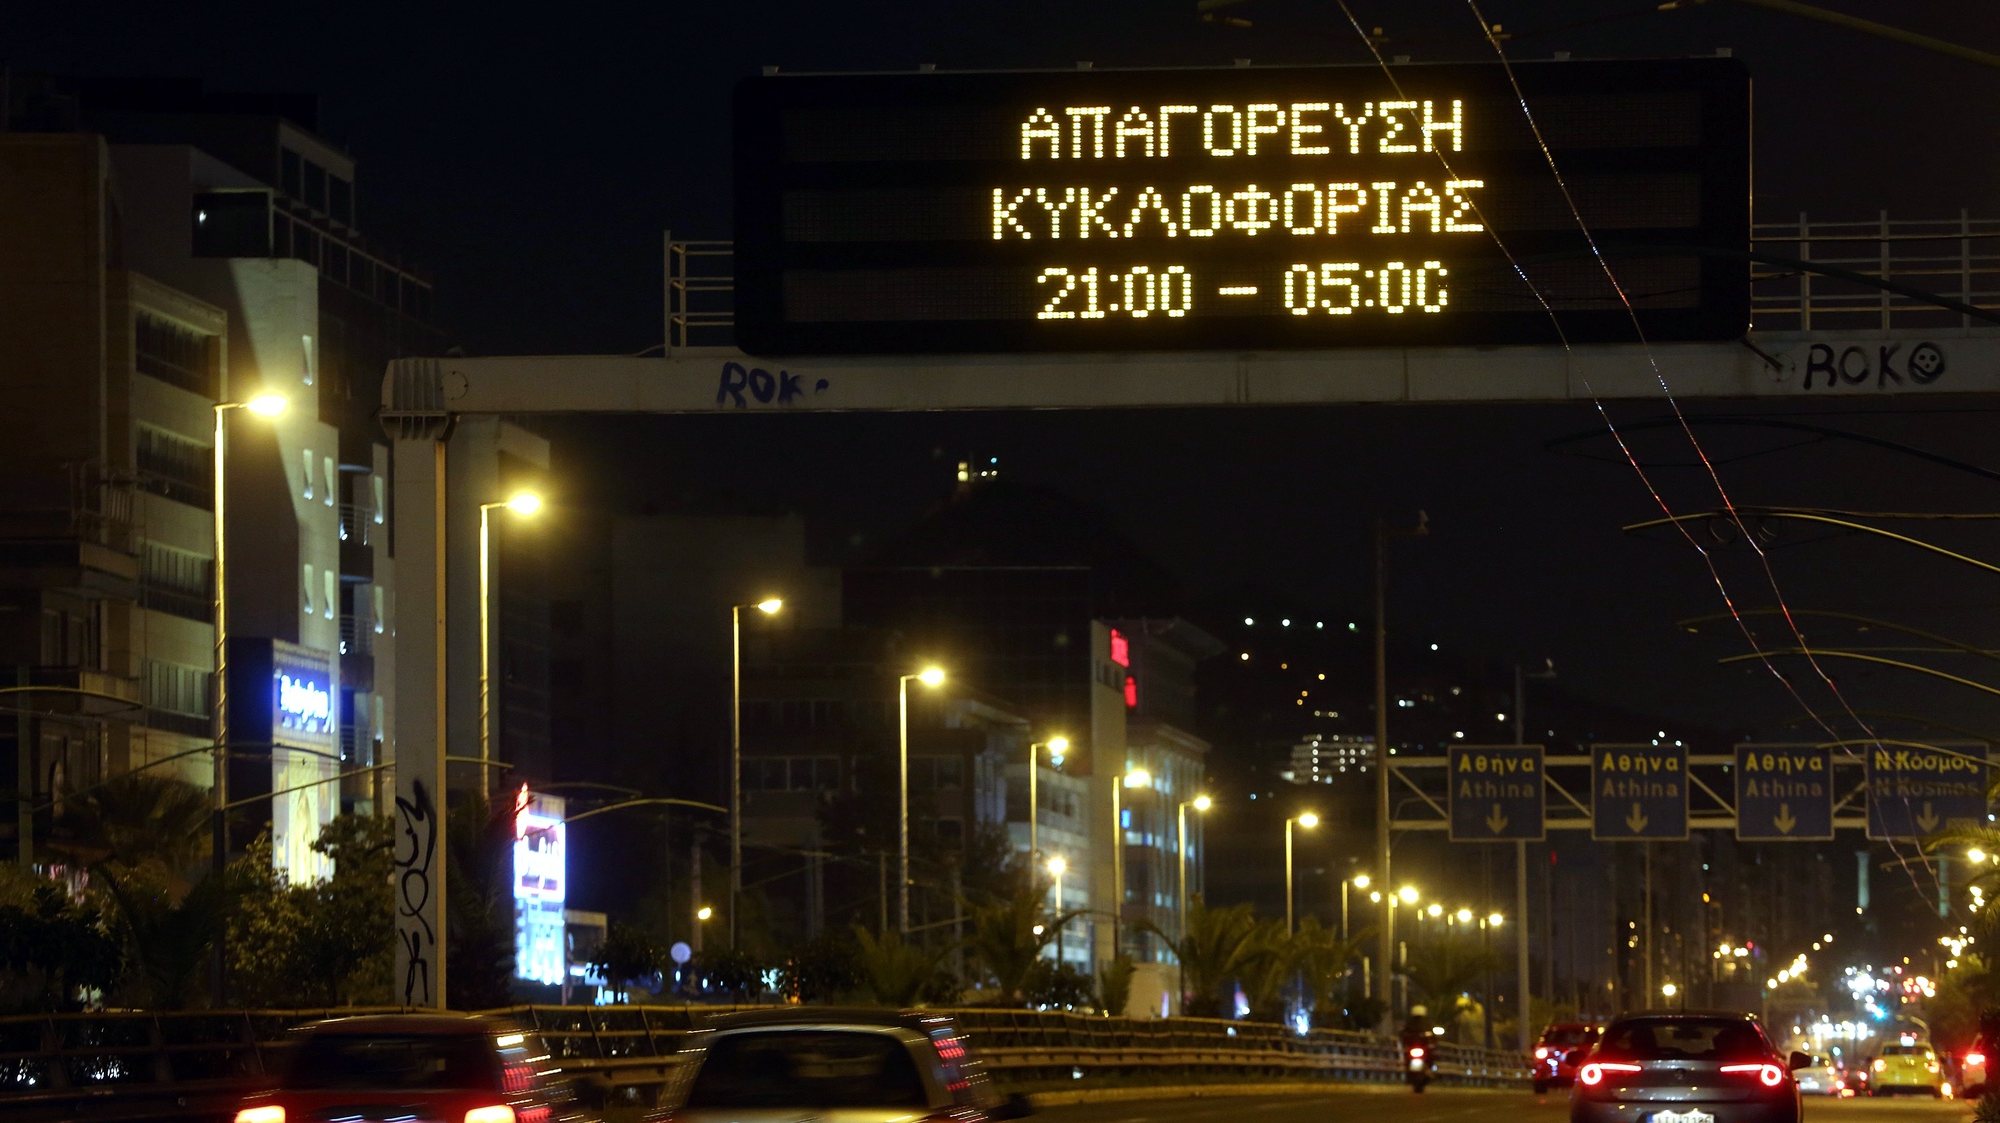 epa08819095 An illuminated sign over an Athens highway reminds drivers of an overnight curfew, Greece, 13 November 2020. An overnight curfew, starting on 13 November, will come into effect across the country between 21:00 and 05:00 everyday, with specific exceptions - work, health and walking pets, to stem the spread of the Covid-19 coronavirus pandemic. Greece is currently observing a nationwide lockdown that went into effect on 07 November and will remain effective through 30 November. During this time, citizens must request a permit for their outings, issued via SMS messaging.  EPA/ALEXANDROS BELTES